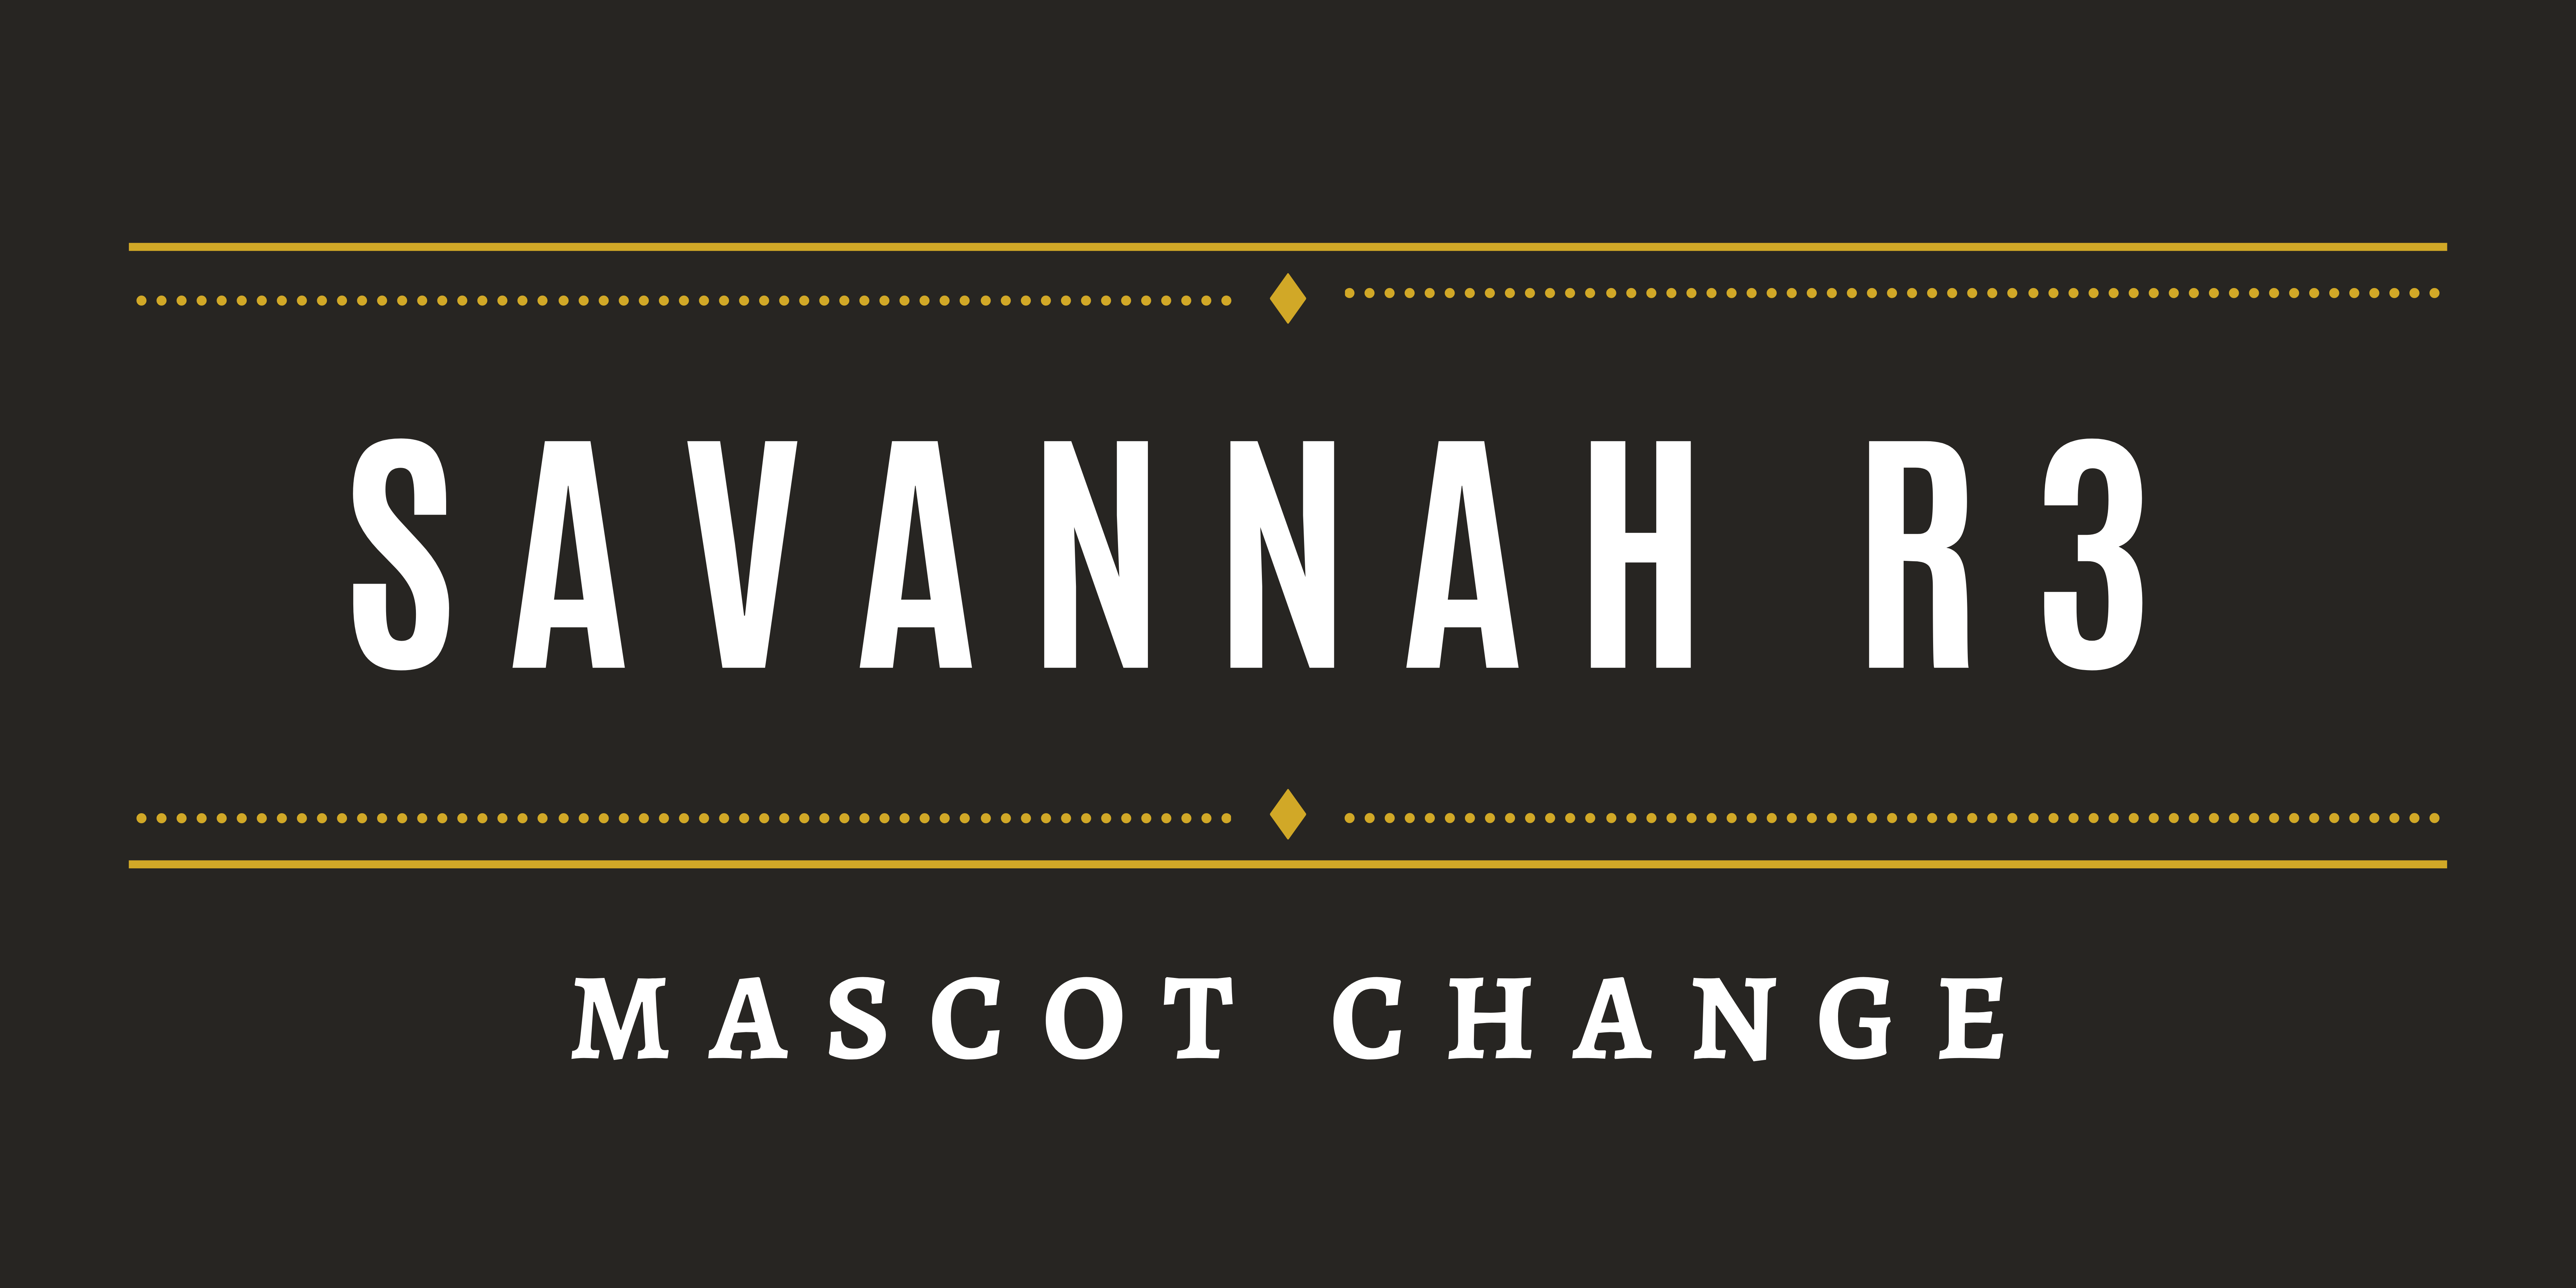 Savannah r3 mascot change black banner with white letters 